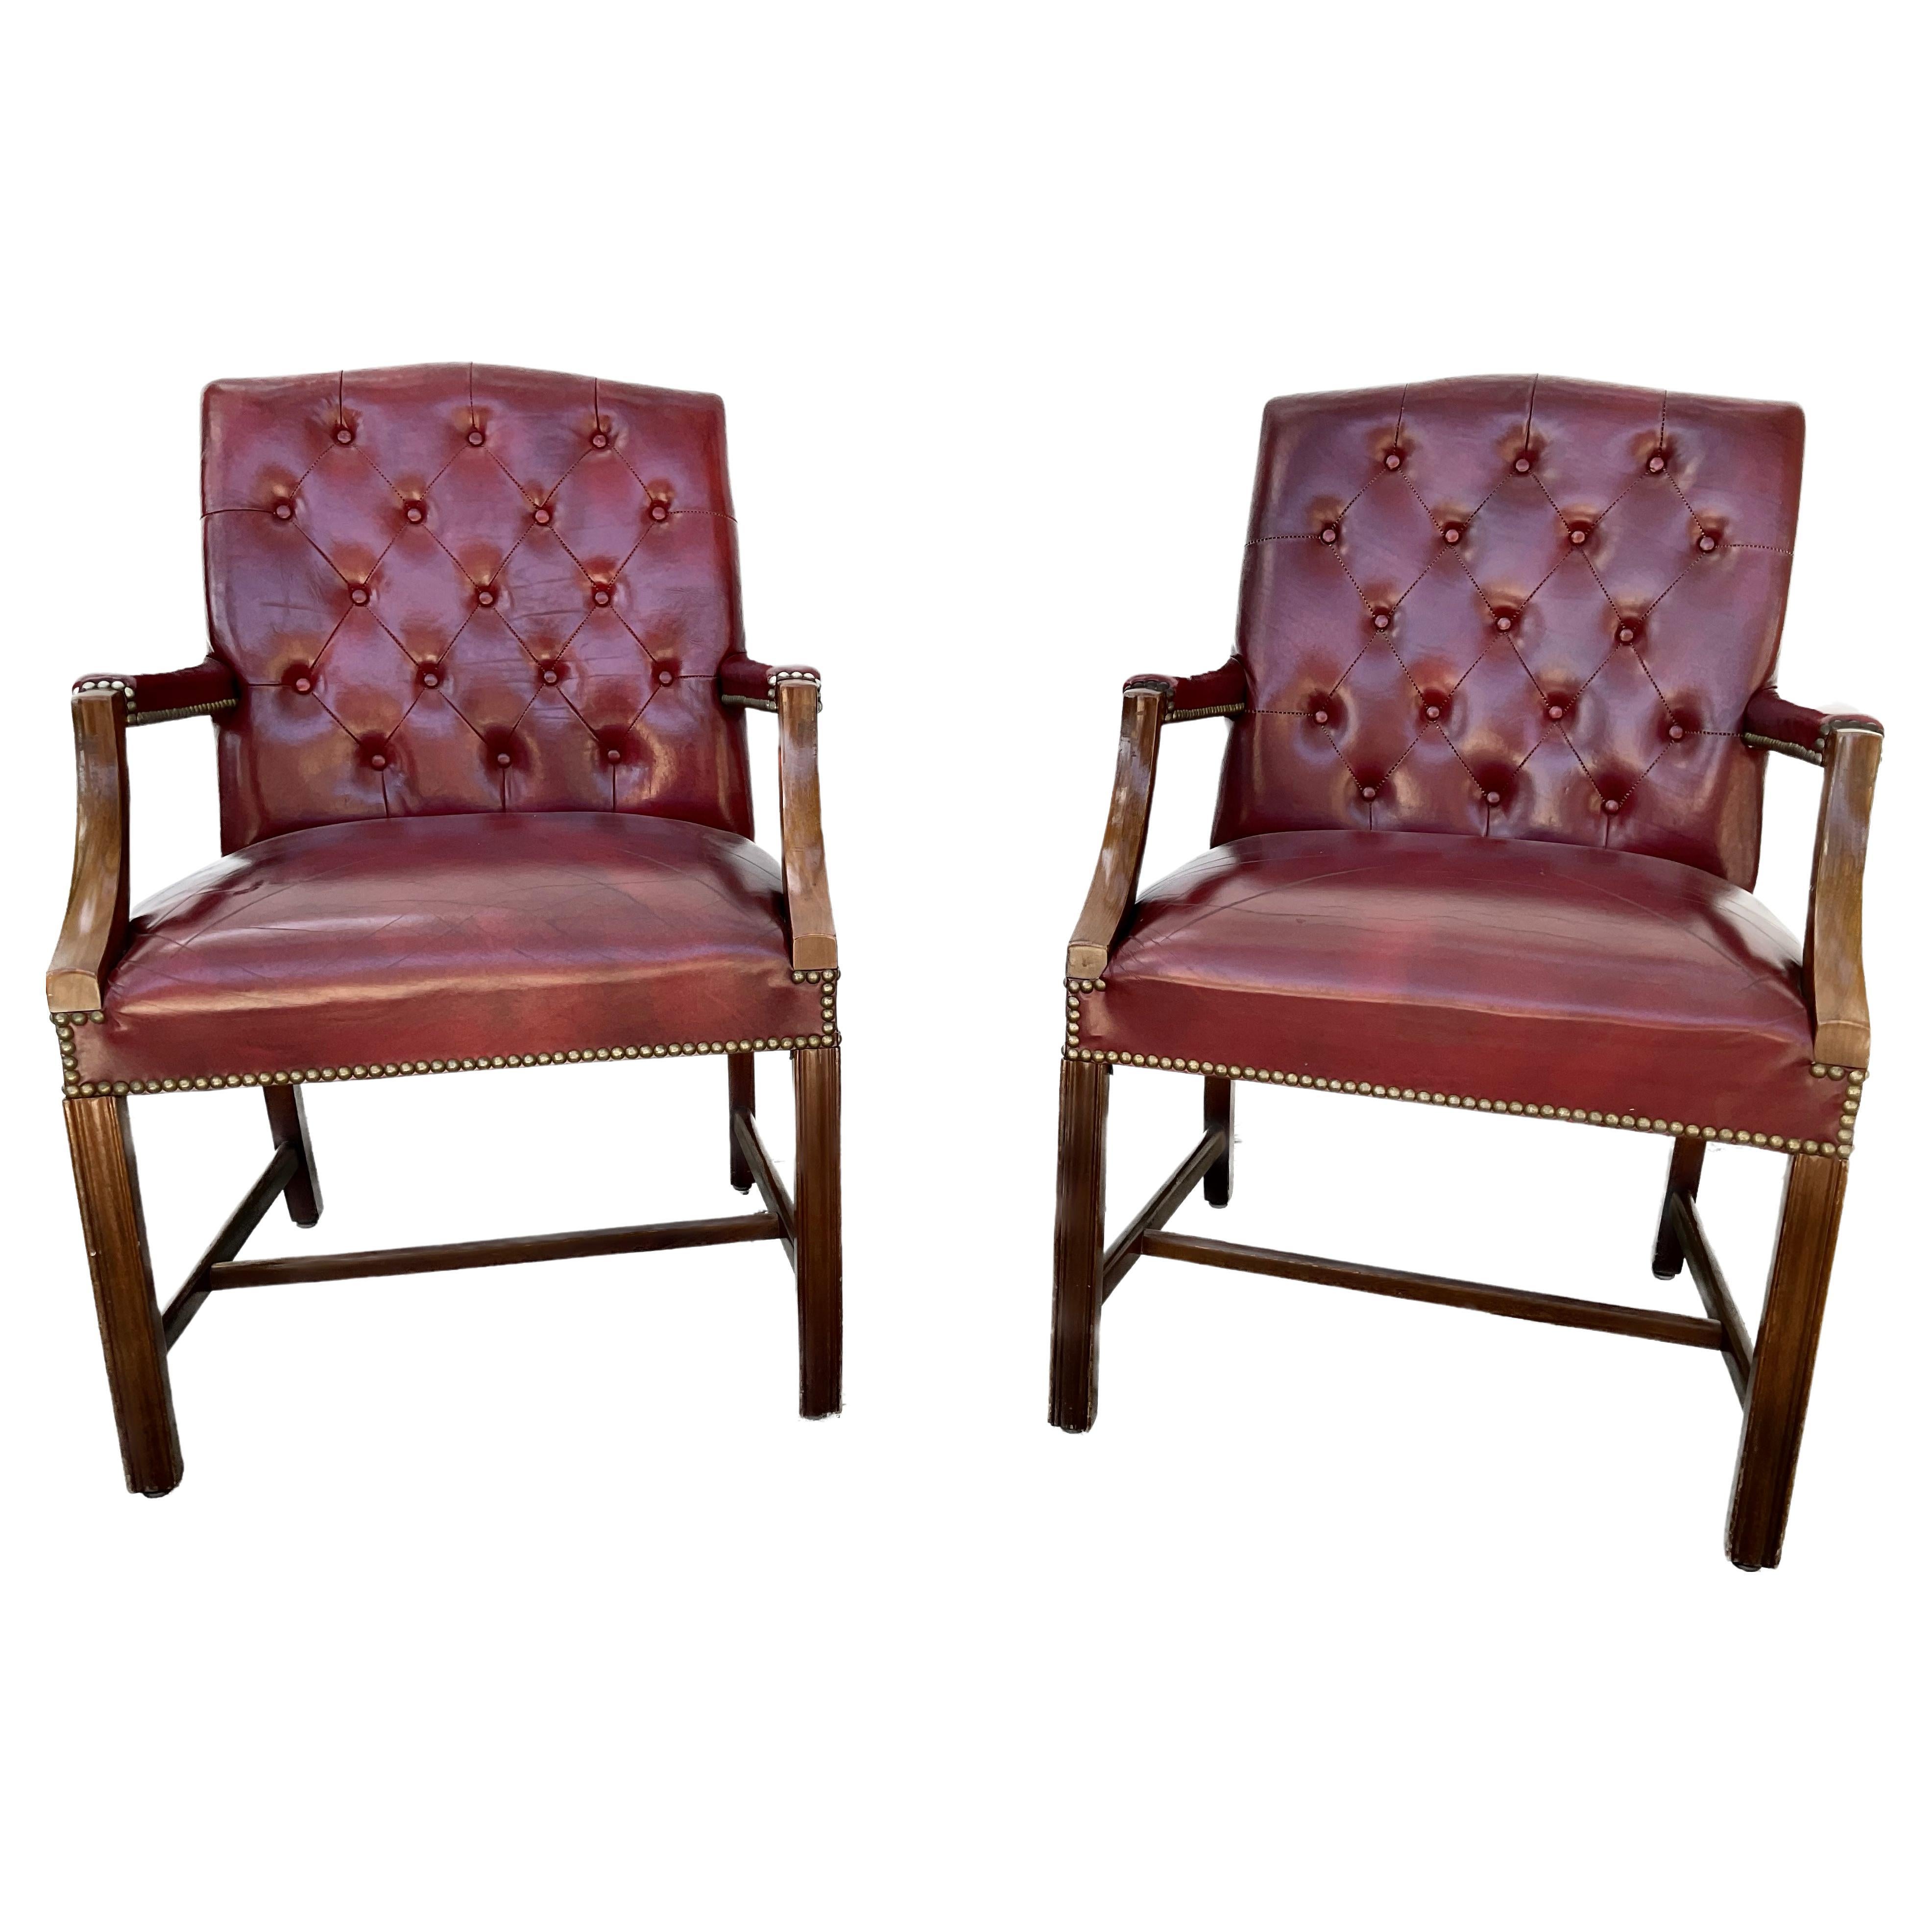 Pair of Tufted Leather Chesterfield Armchairs For Sale